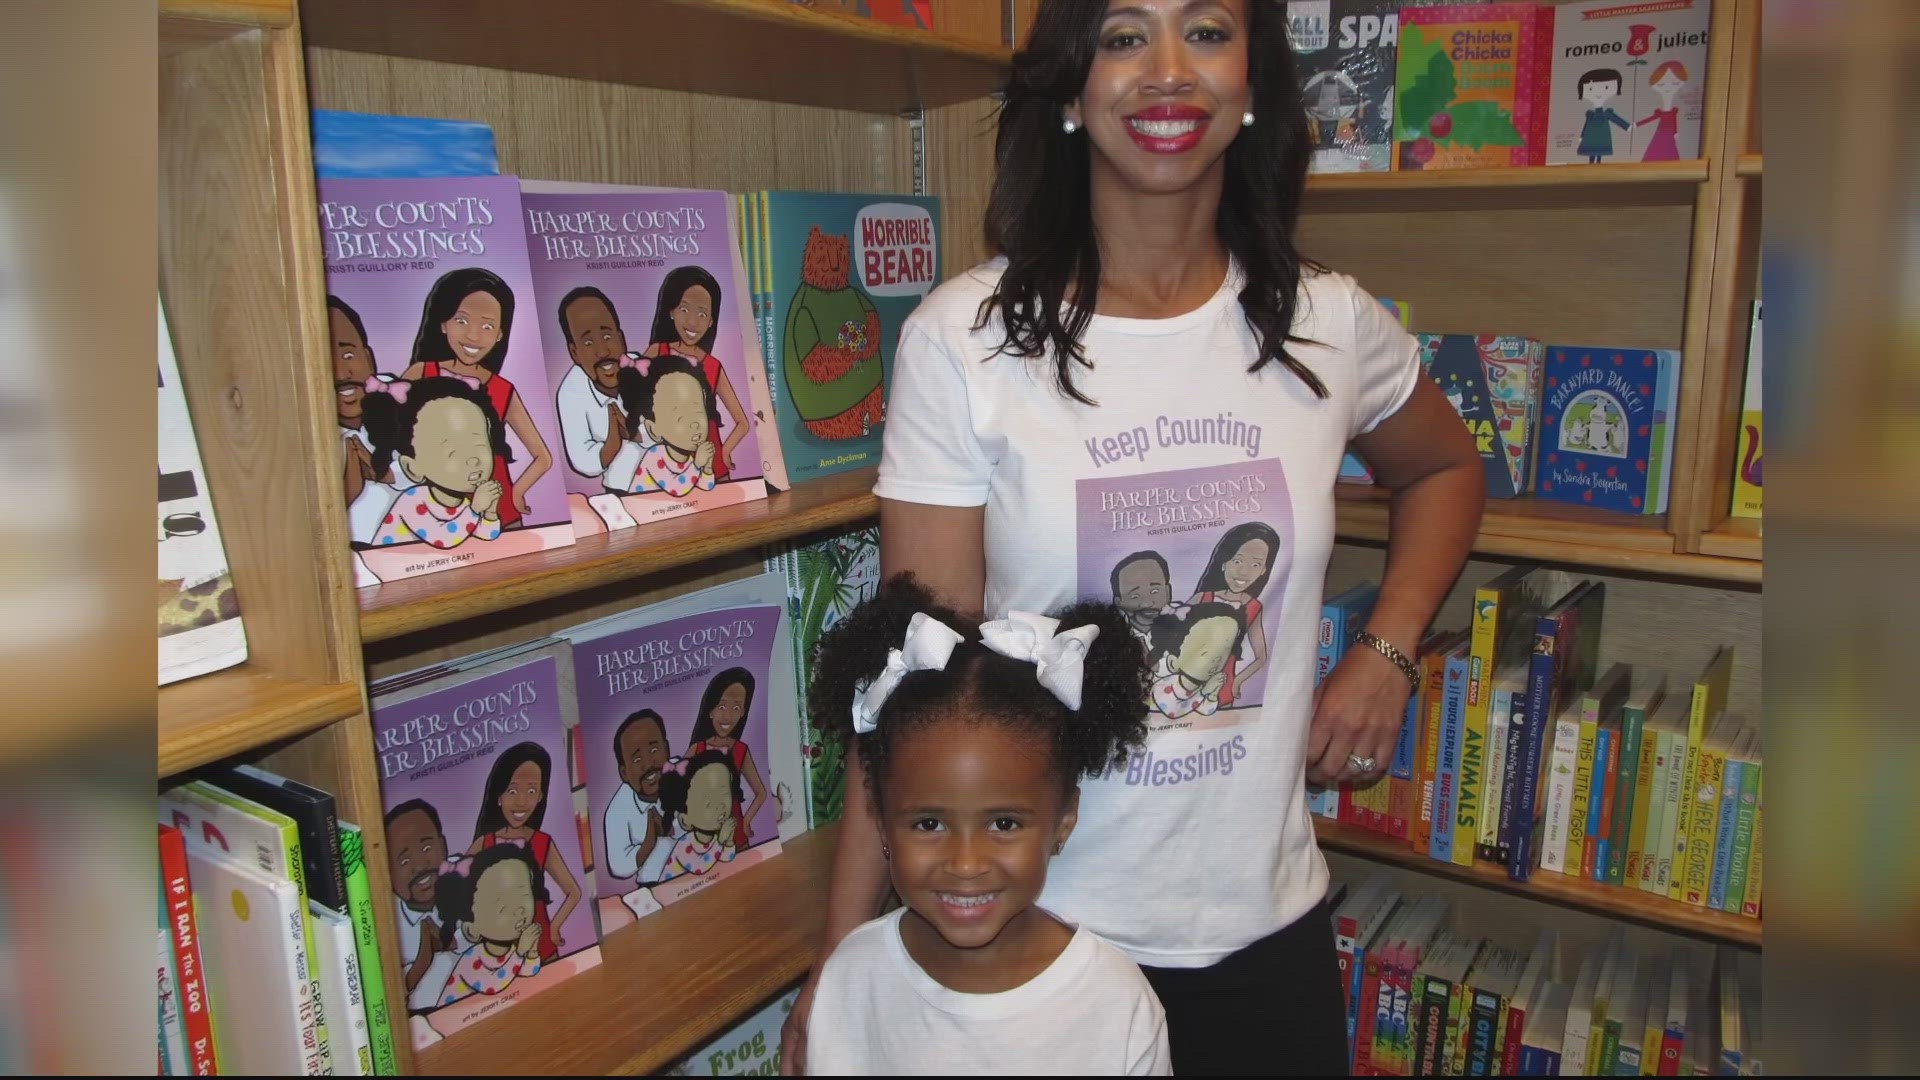 "Harper Counts Her Blessings" is Kristi Guillory Reid's first book.